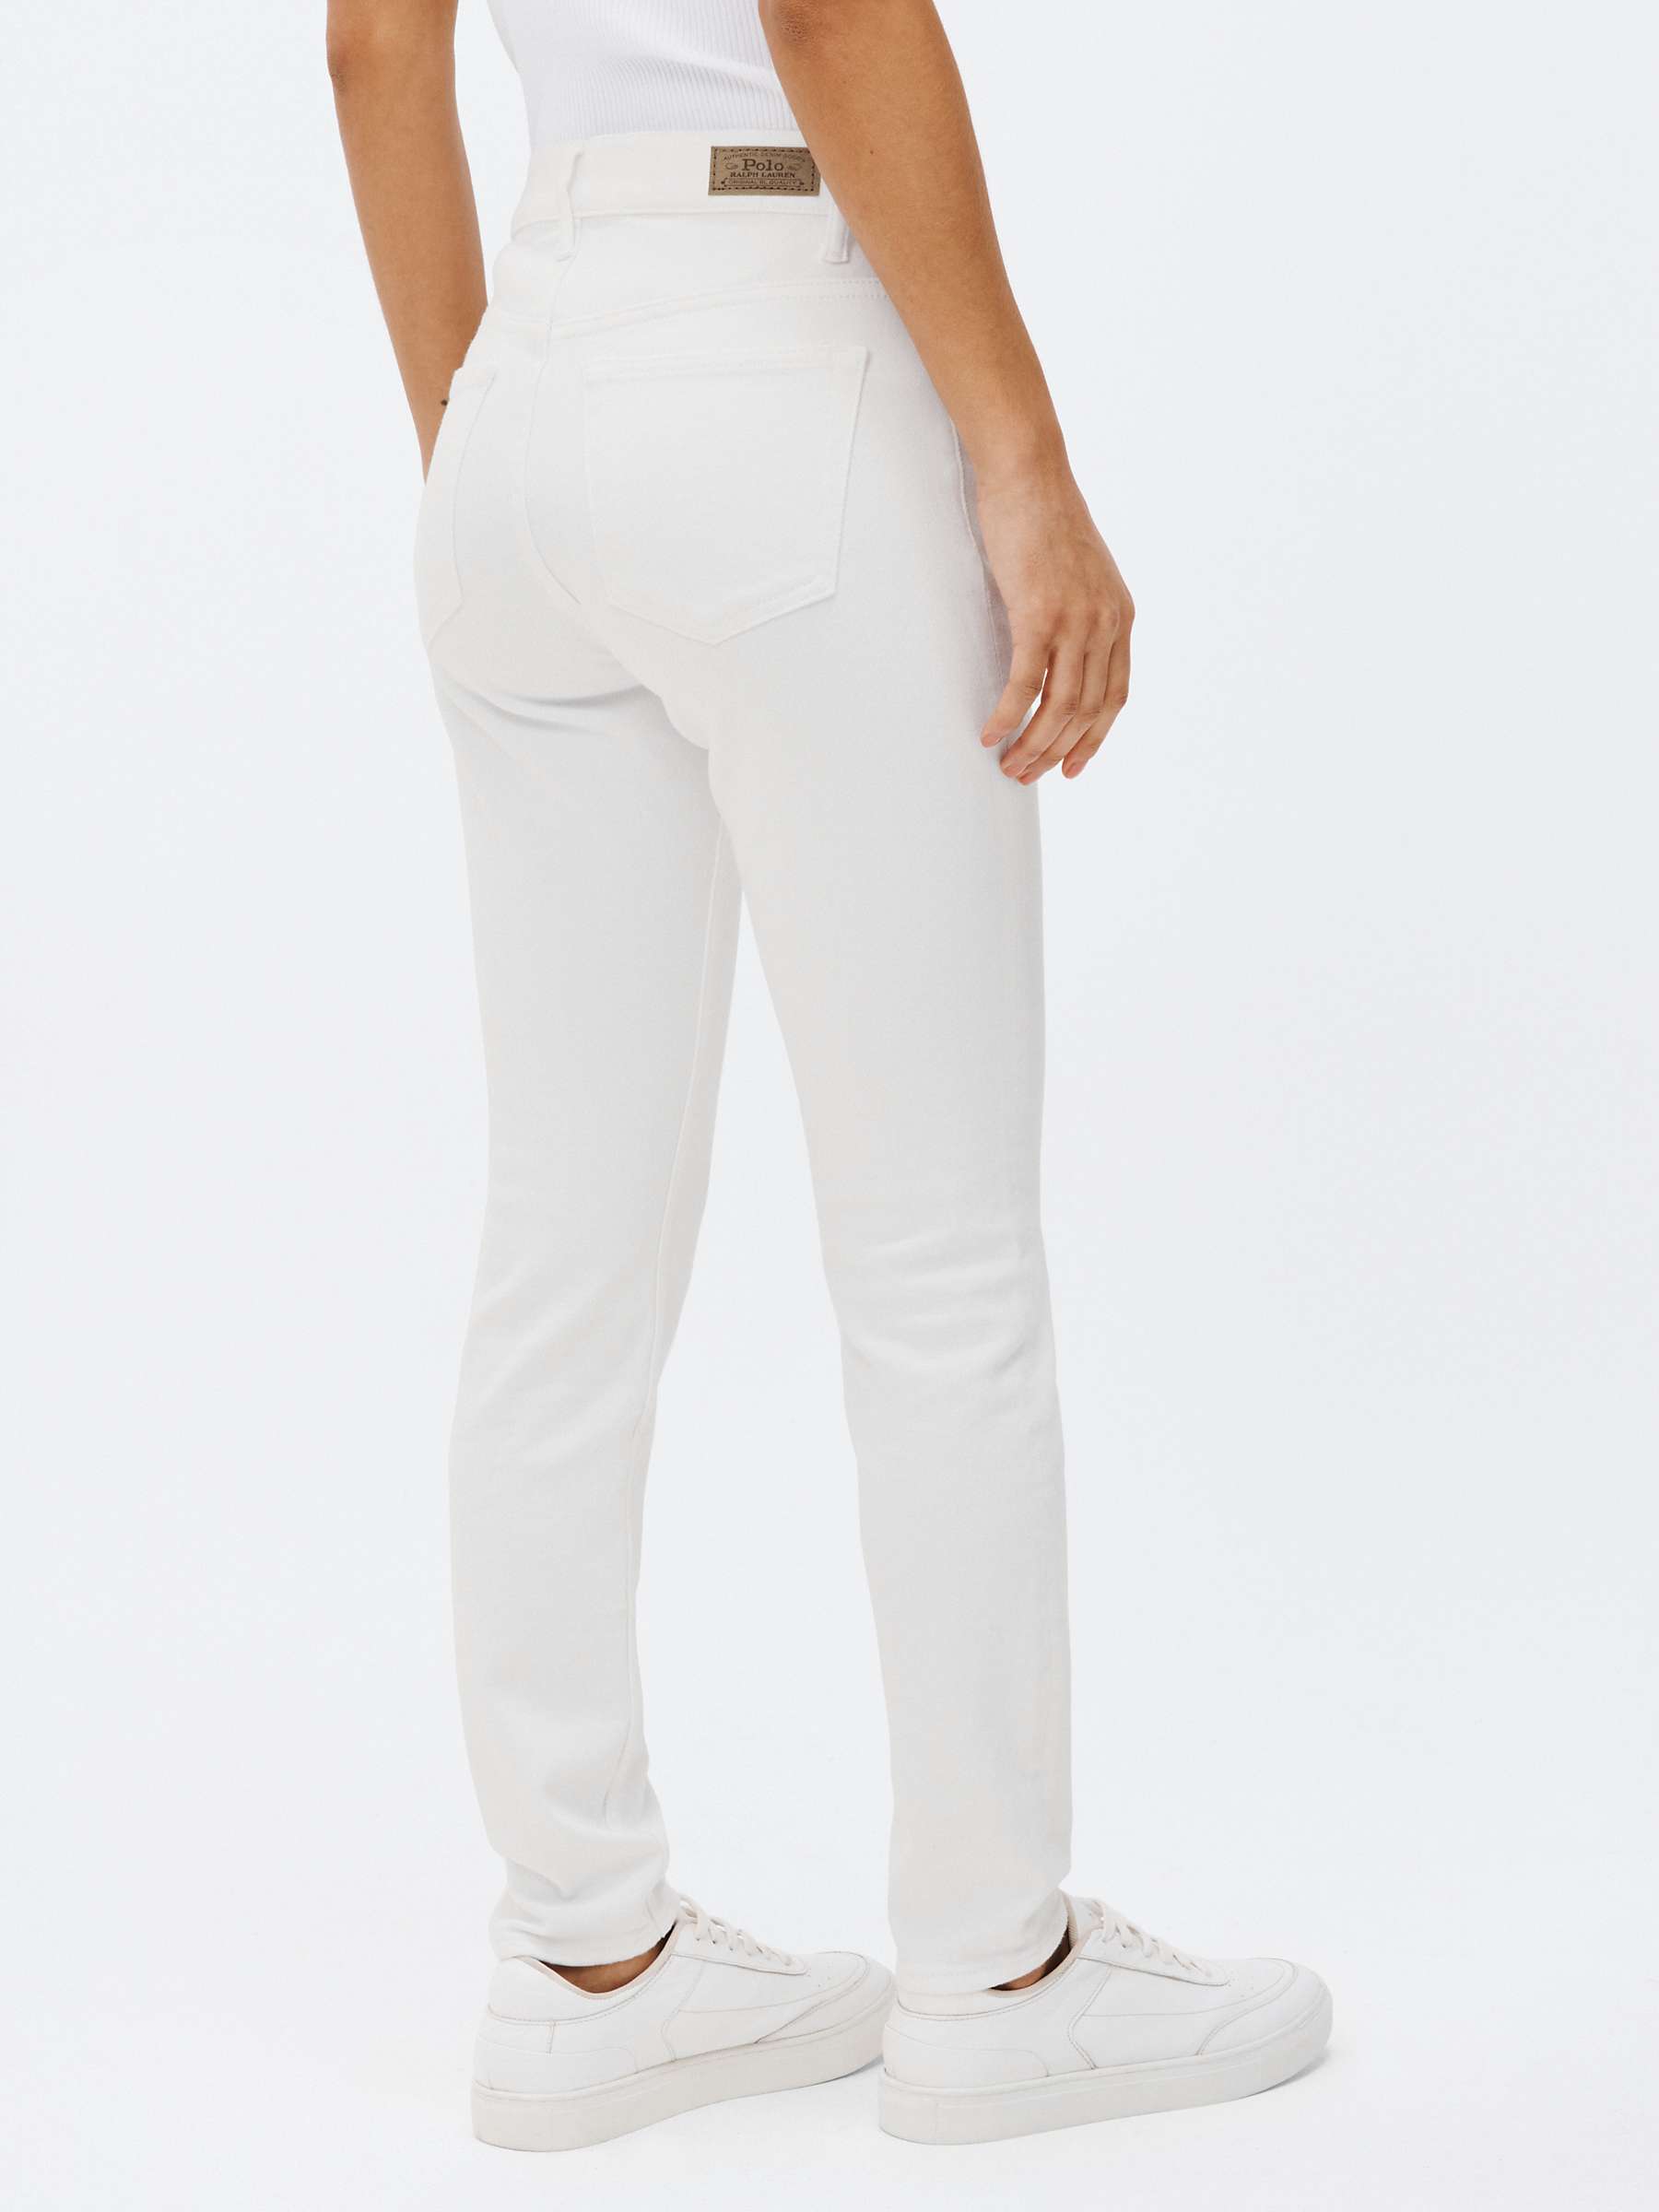 Buy Polo Ralph Lauren Mid Rise Skinny Jeans, Amesbury Wash Online at johnlewis.com